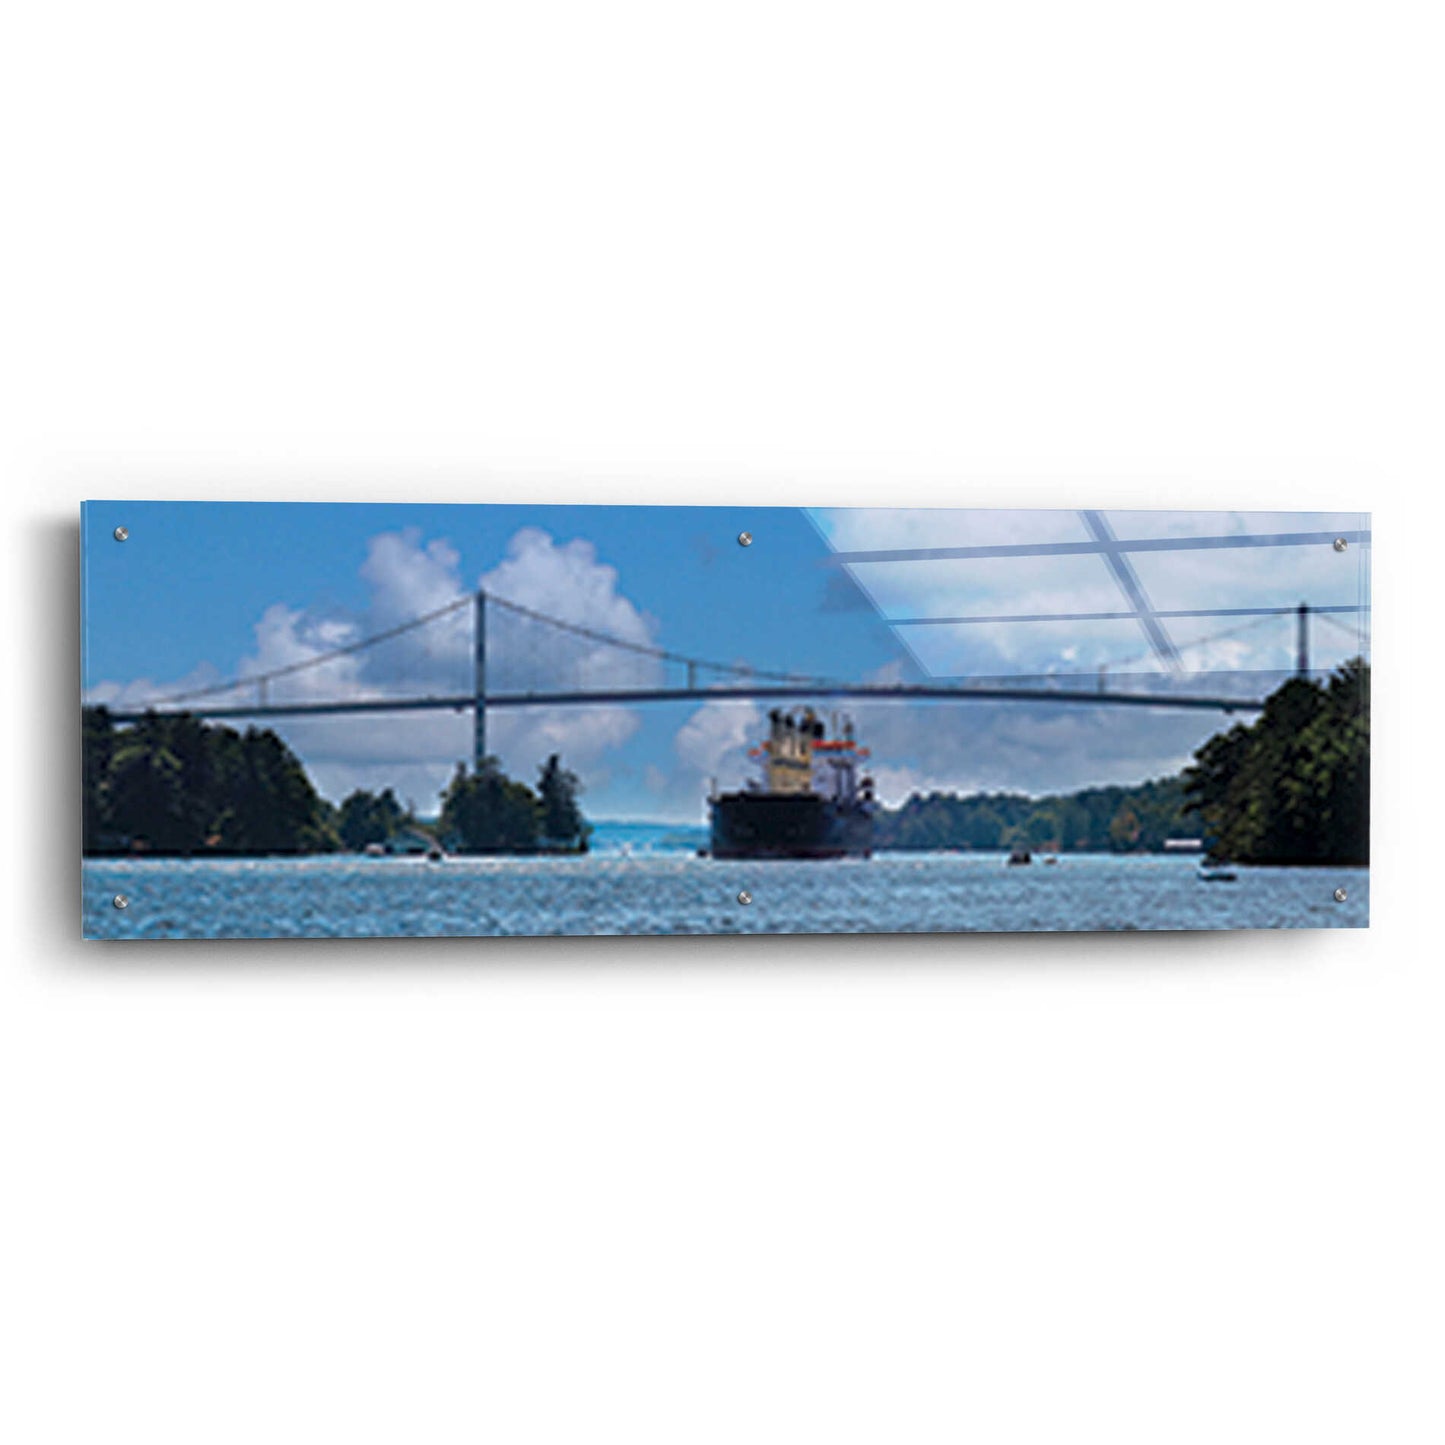 Epic Art 'Rolling on the River' by Lori Deiter, Acrylic Glass Wall Art,48x16